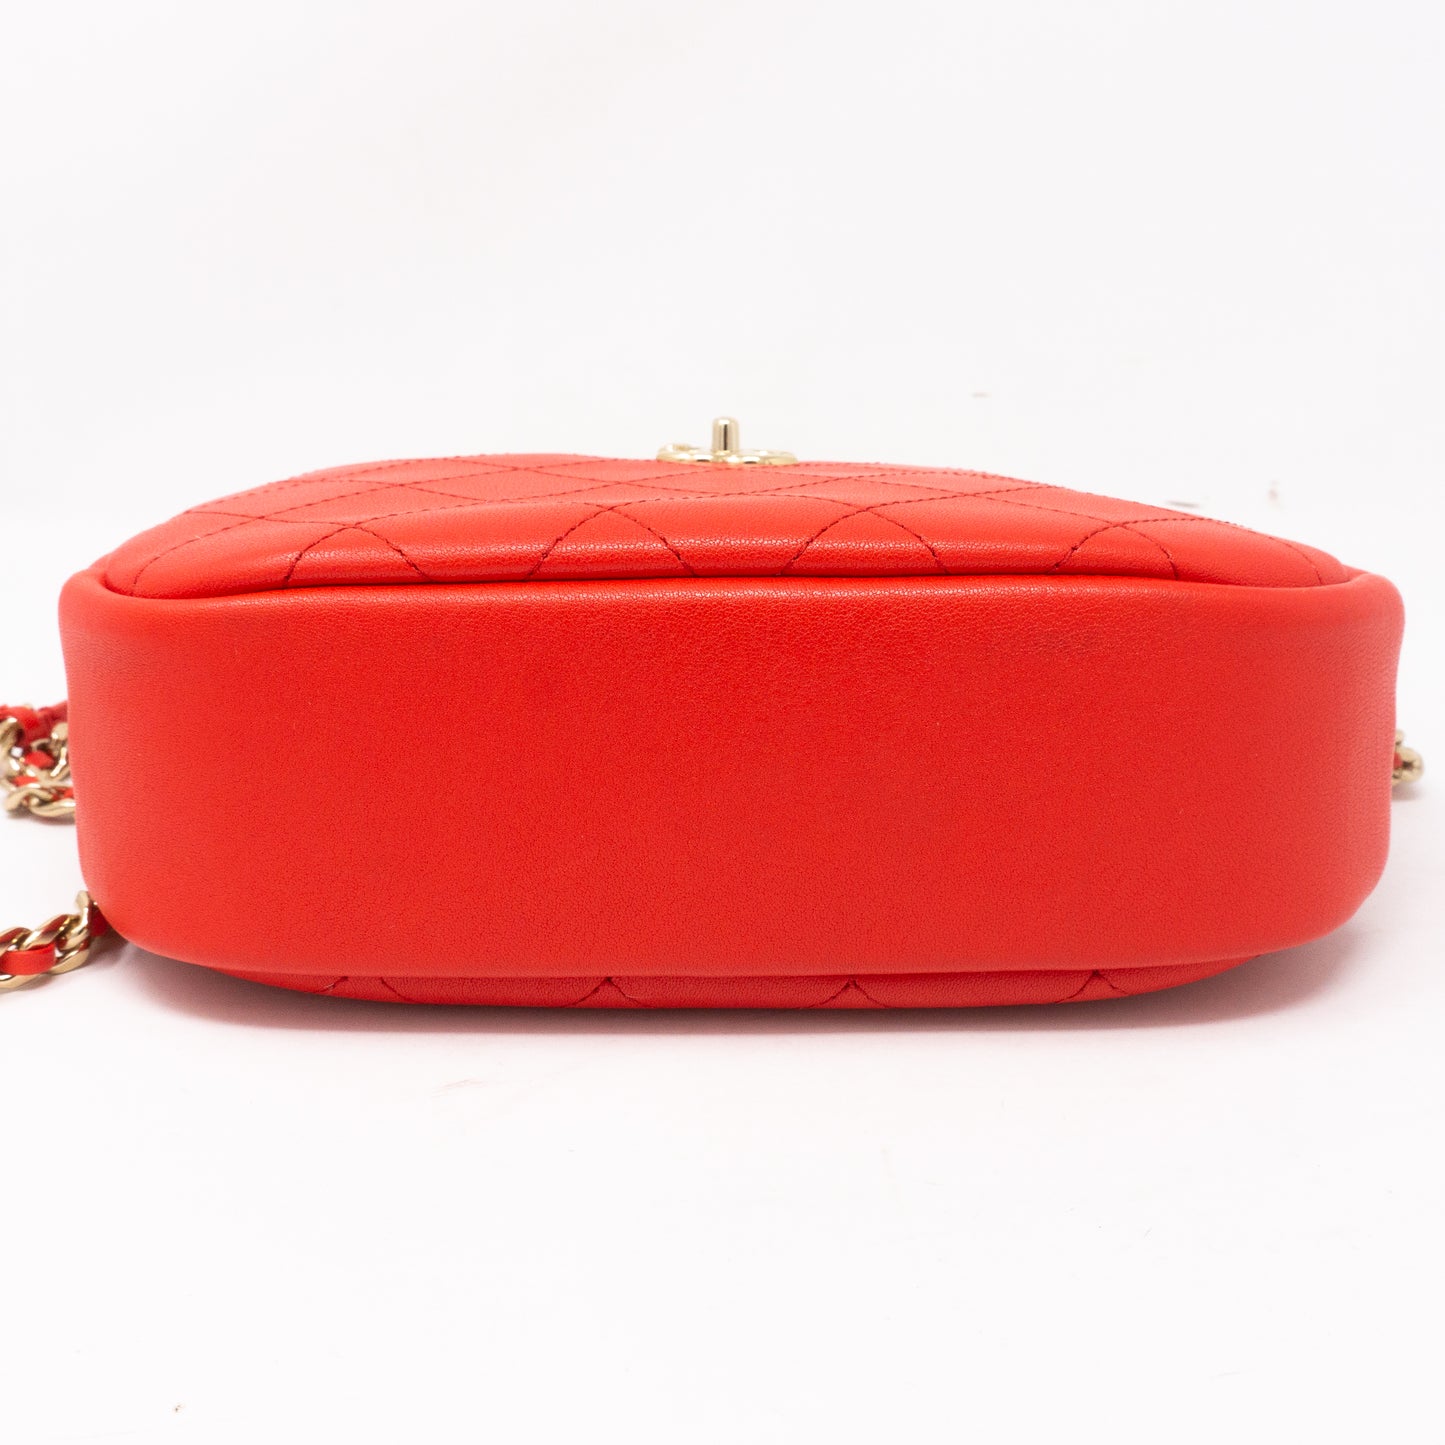 Casual Trip Camera Case Red Leather